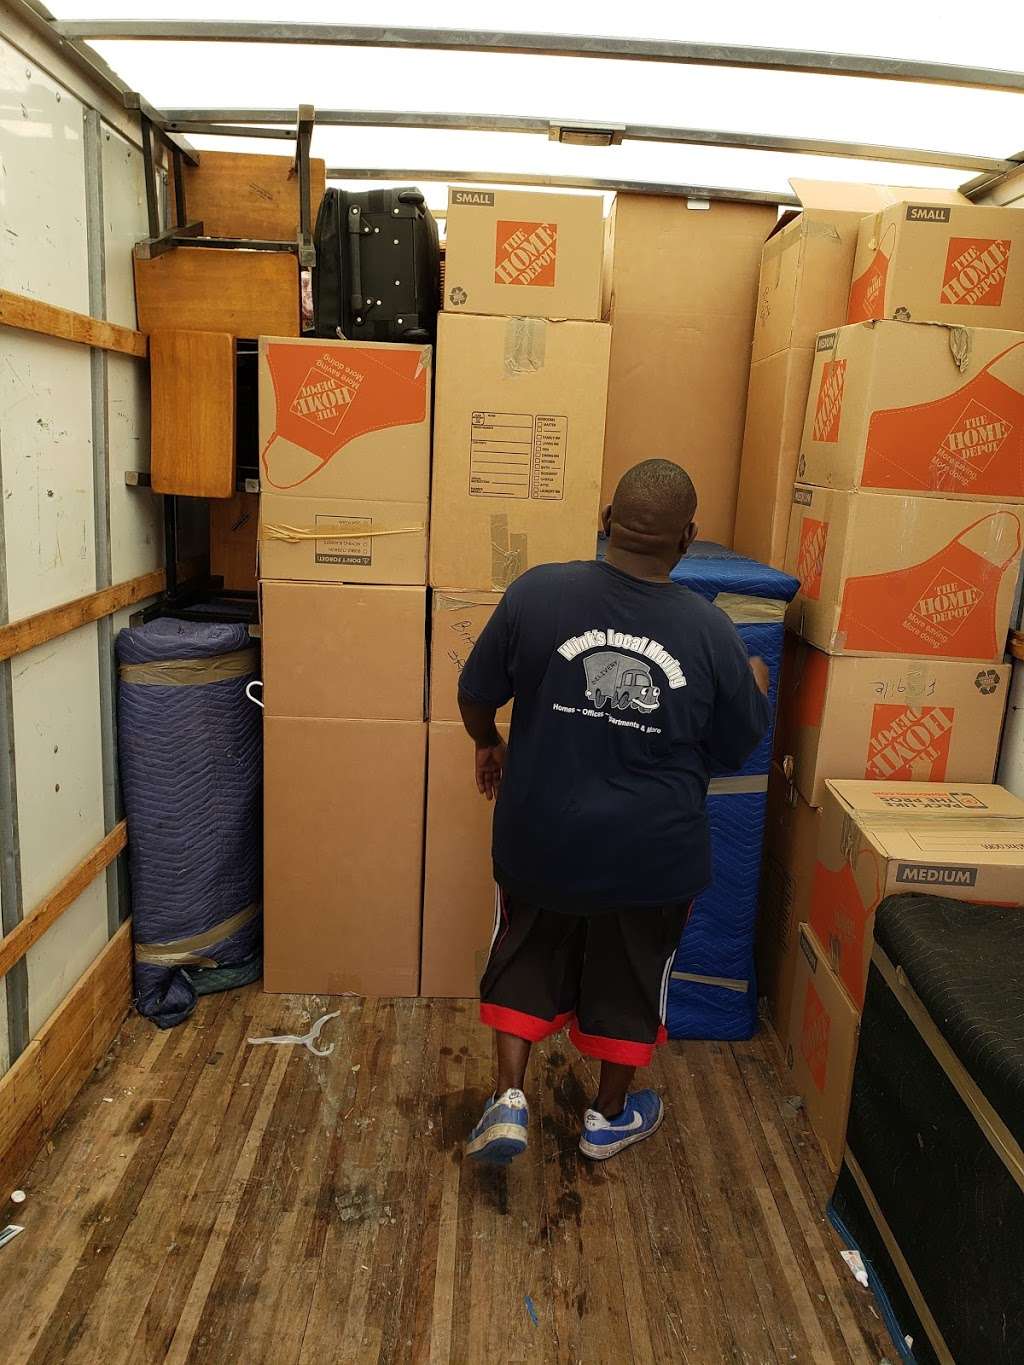 Winks Local Moving | 1800 Executive Rd #1, Winter Haven, FL 33884, USA | Phone: (863) 292-8900